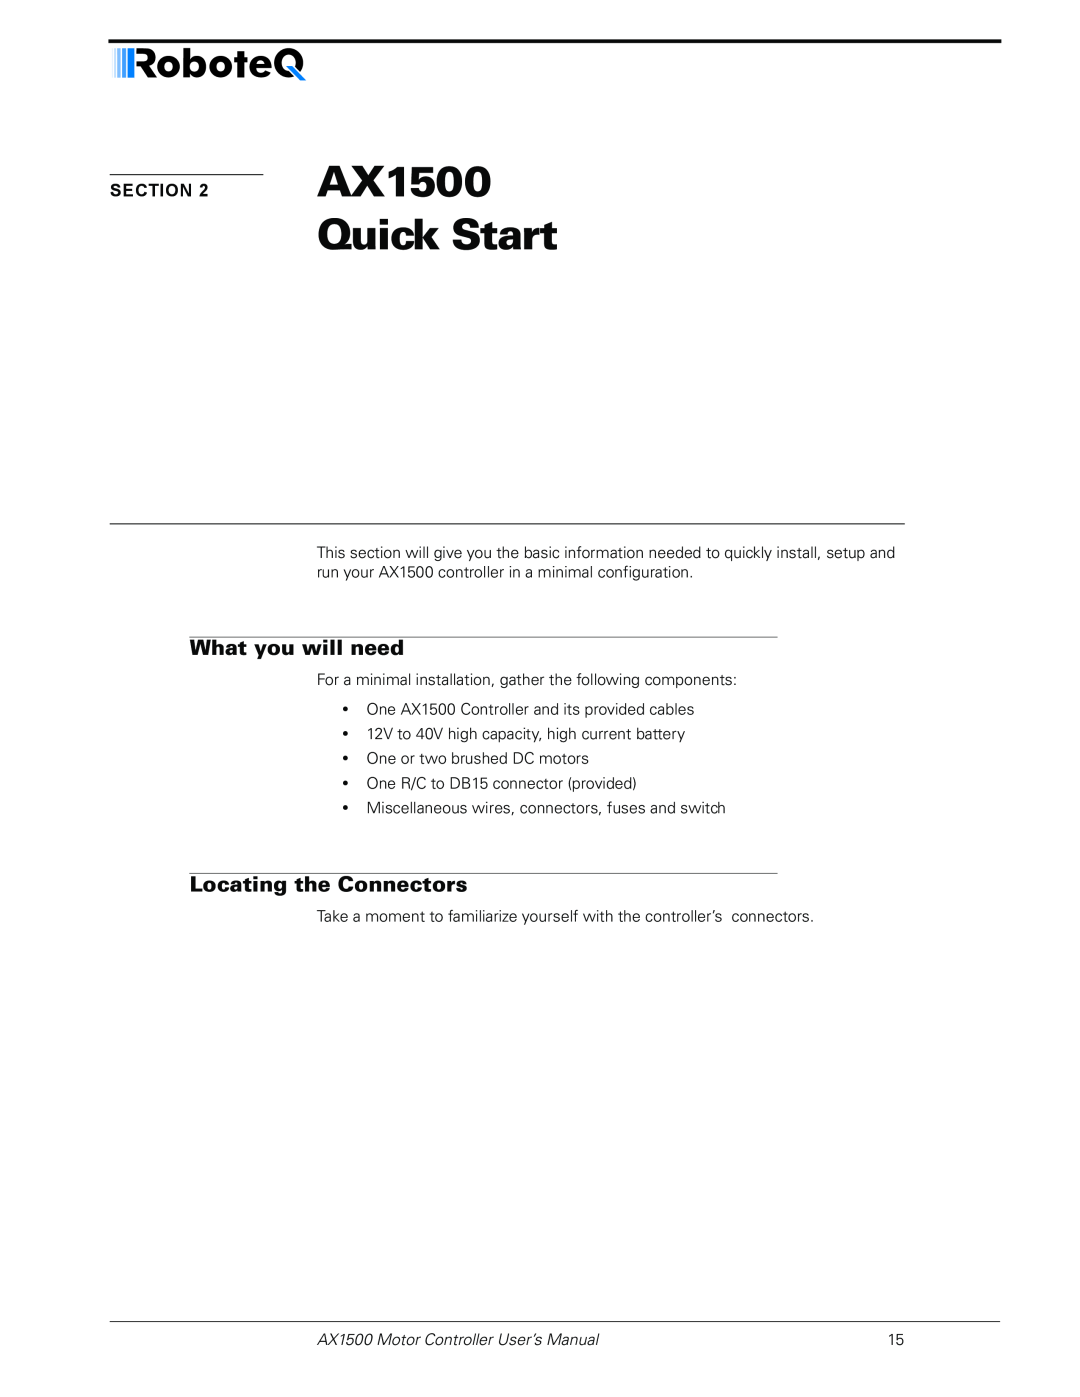 RoboteQ AX2550 Quick Start, What you will need, Locating the Connectors, AX1500 Motor Controller User’s Manual 